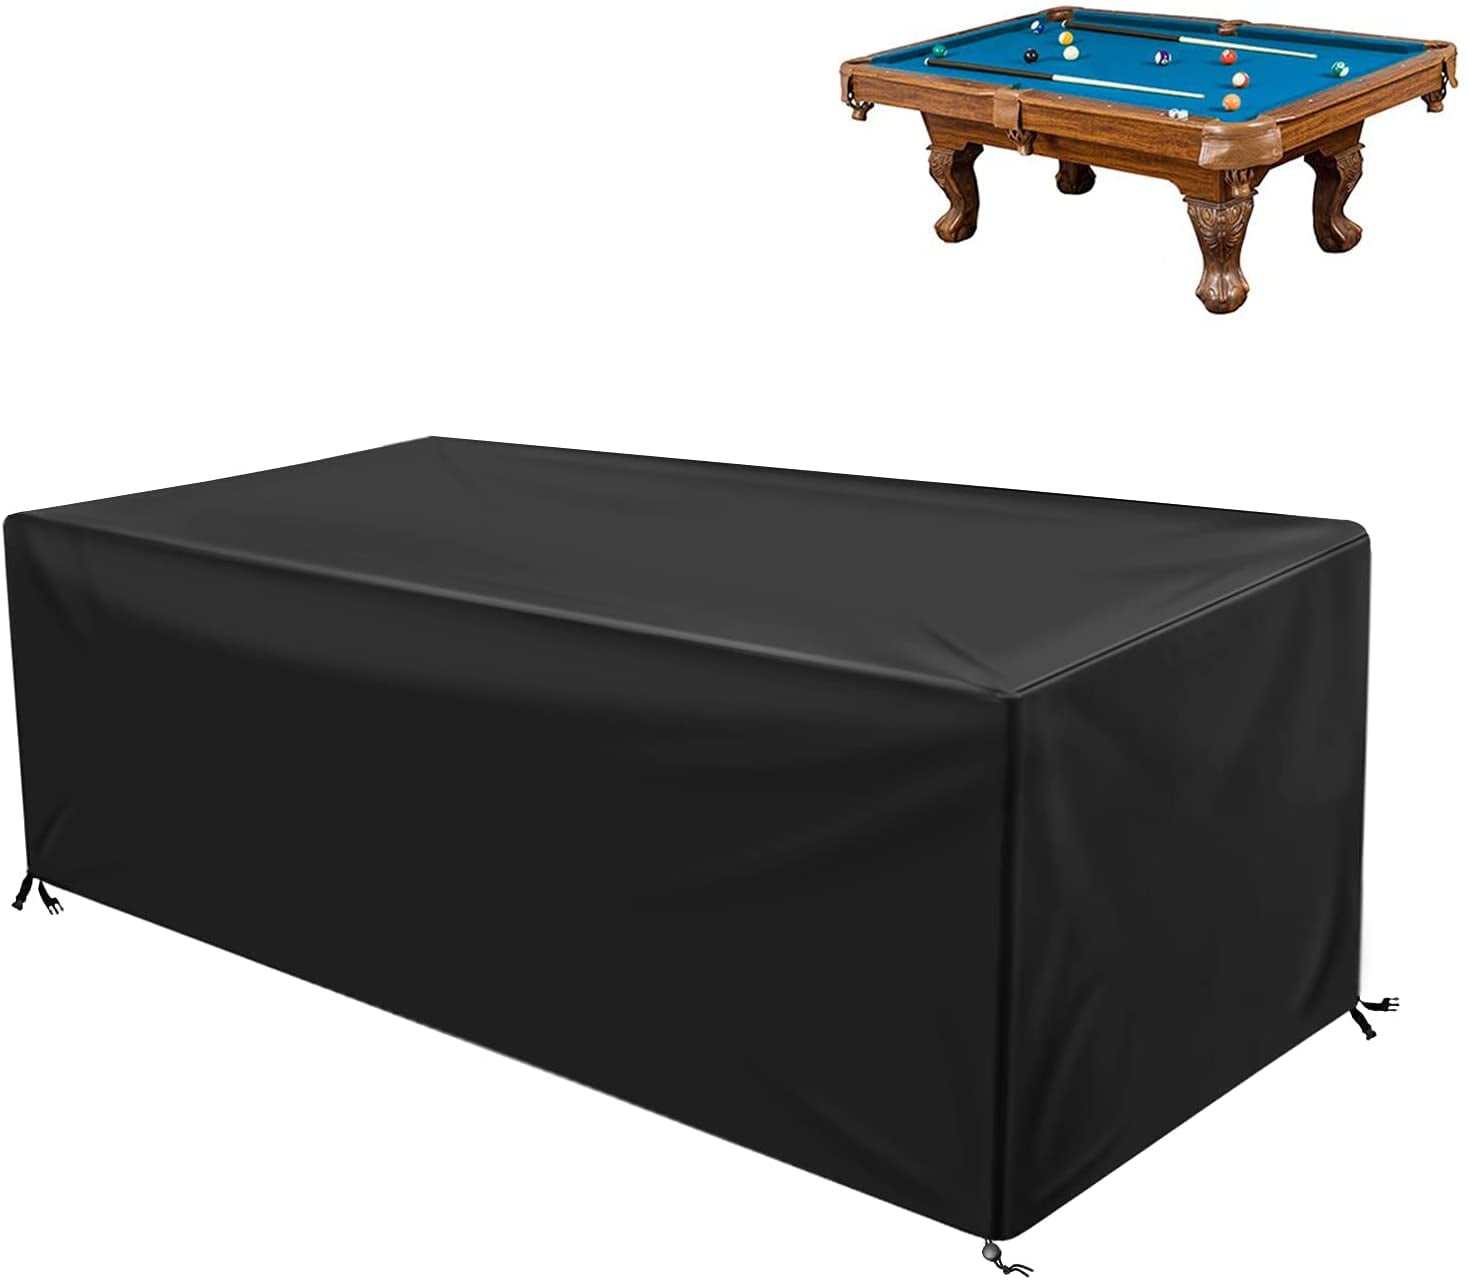 Details about   8F Pool able Cover Billiard able Cover Foot Pool Snooker Dustproof  U 